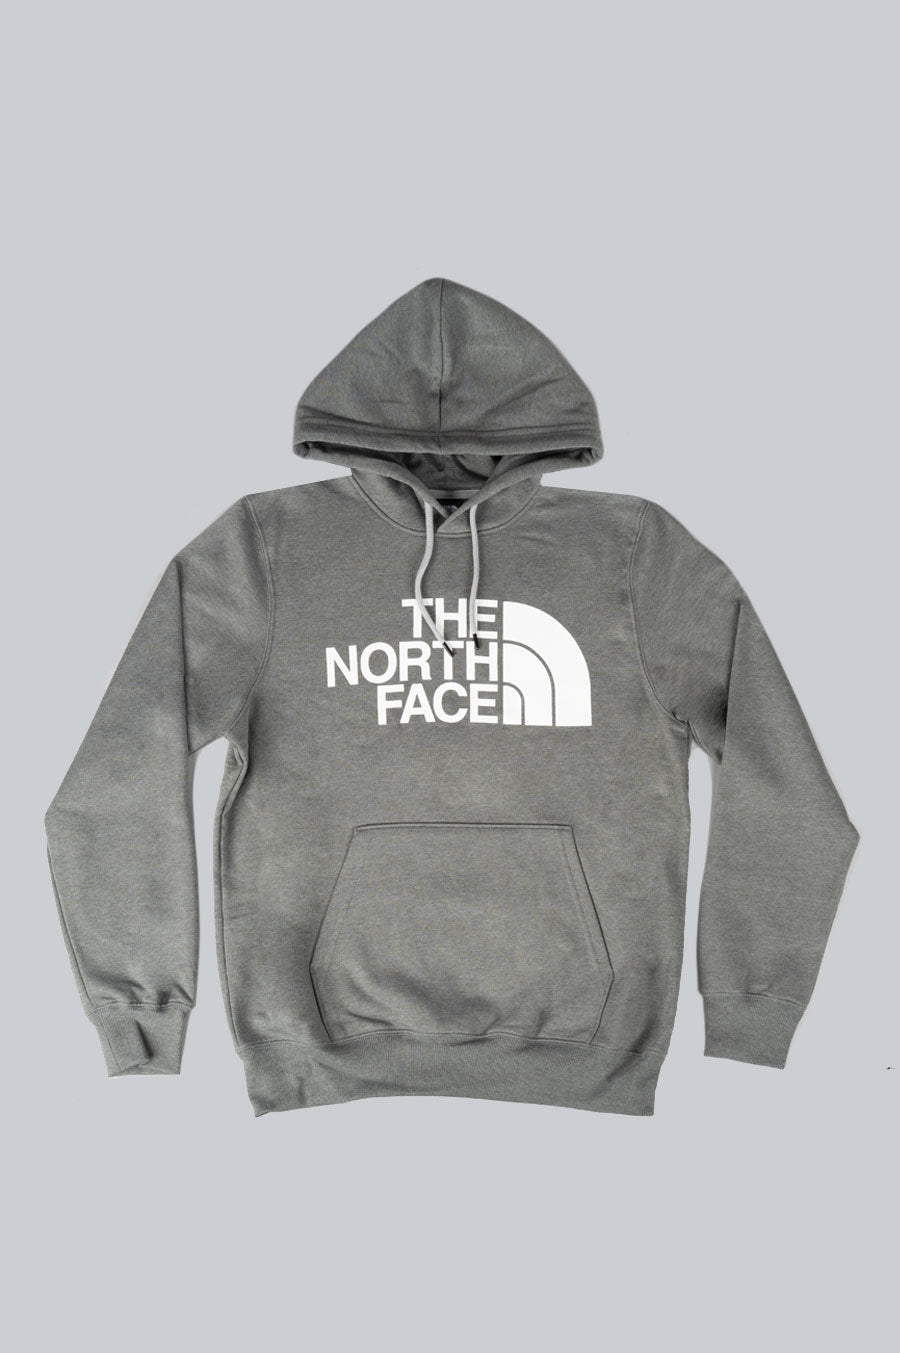 THE NORTH FACE HALF DOME PULLOVER HOODIE MEDIUM GREY HEATHER